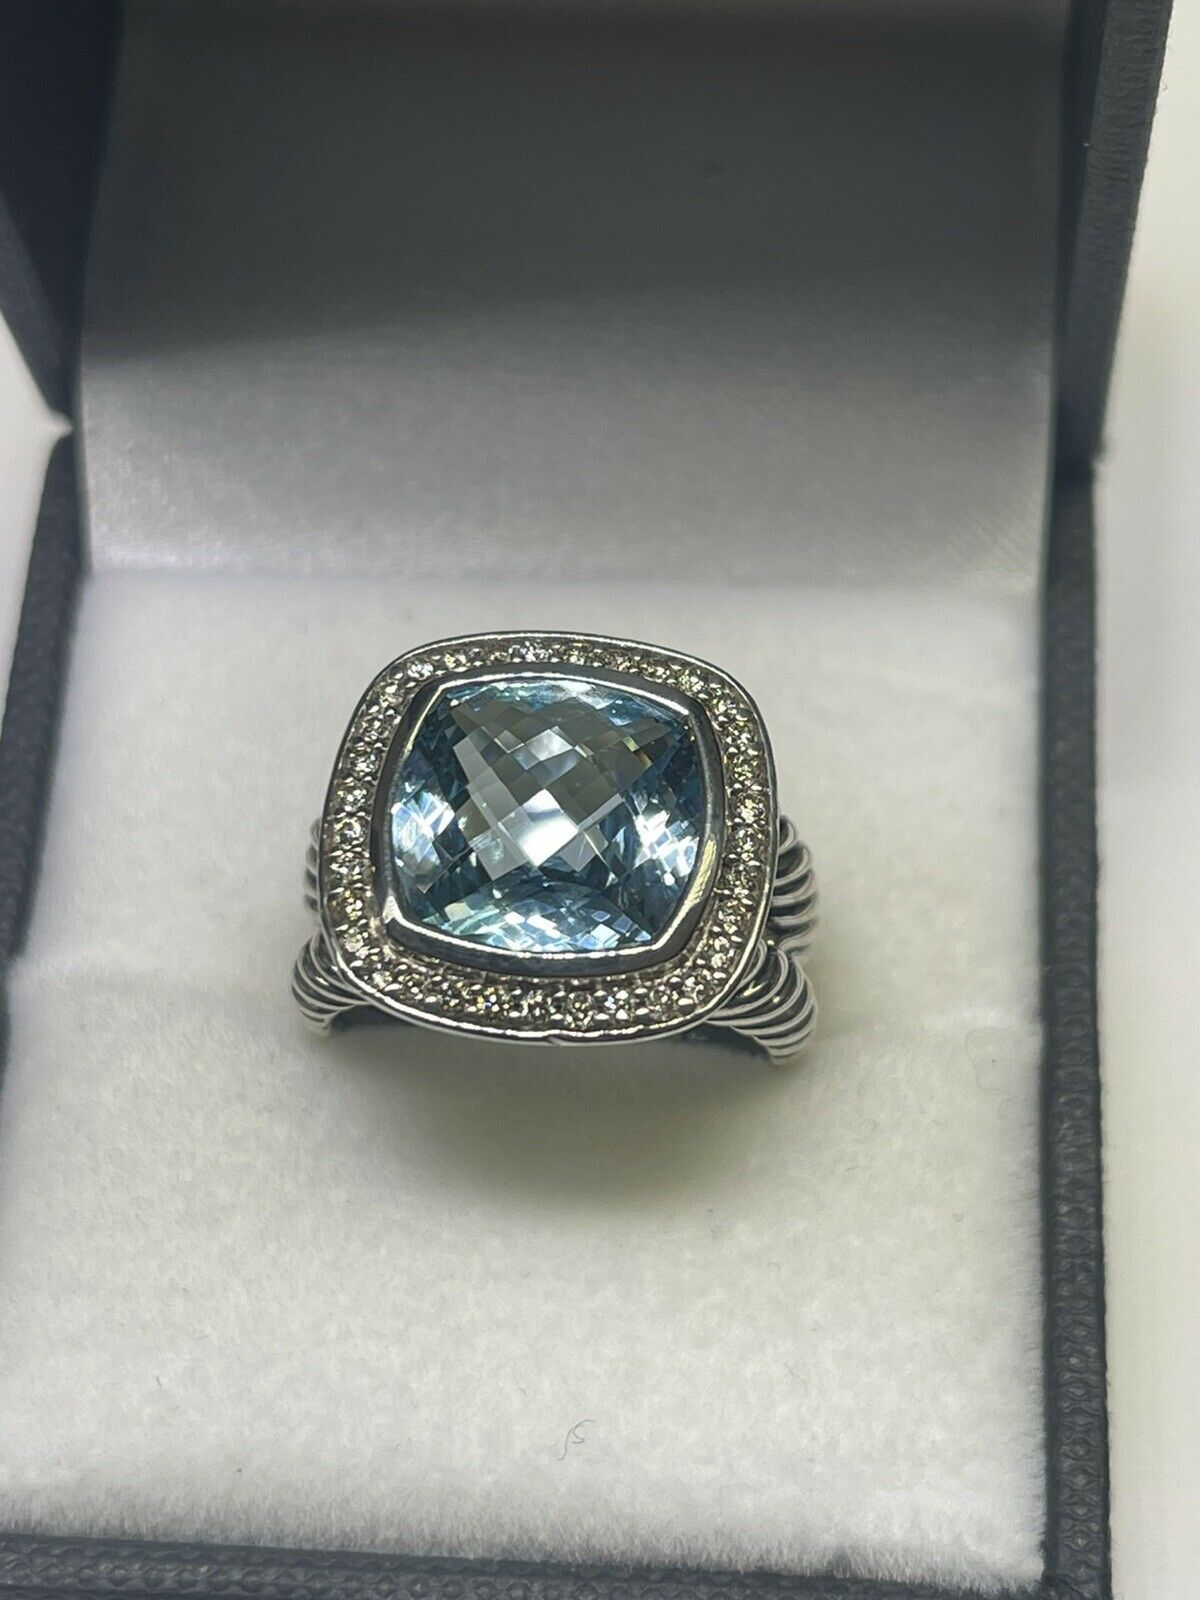 Primary image for DAVID YURMAN (c) Sterling Silver 11mm Blue Topaz Albion Diamond Ring (Size 6)